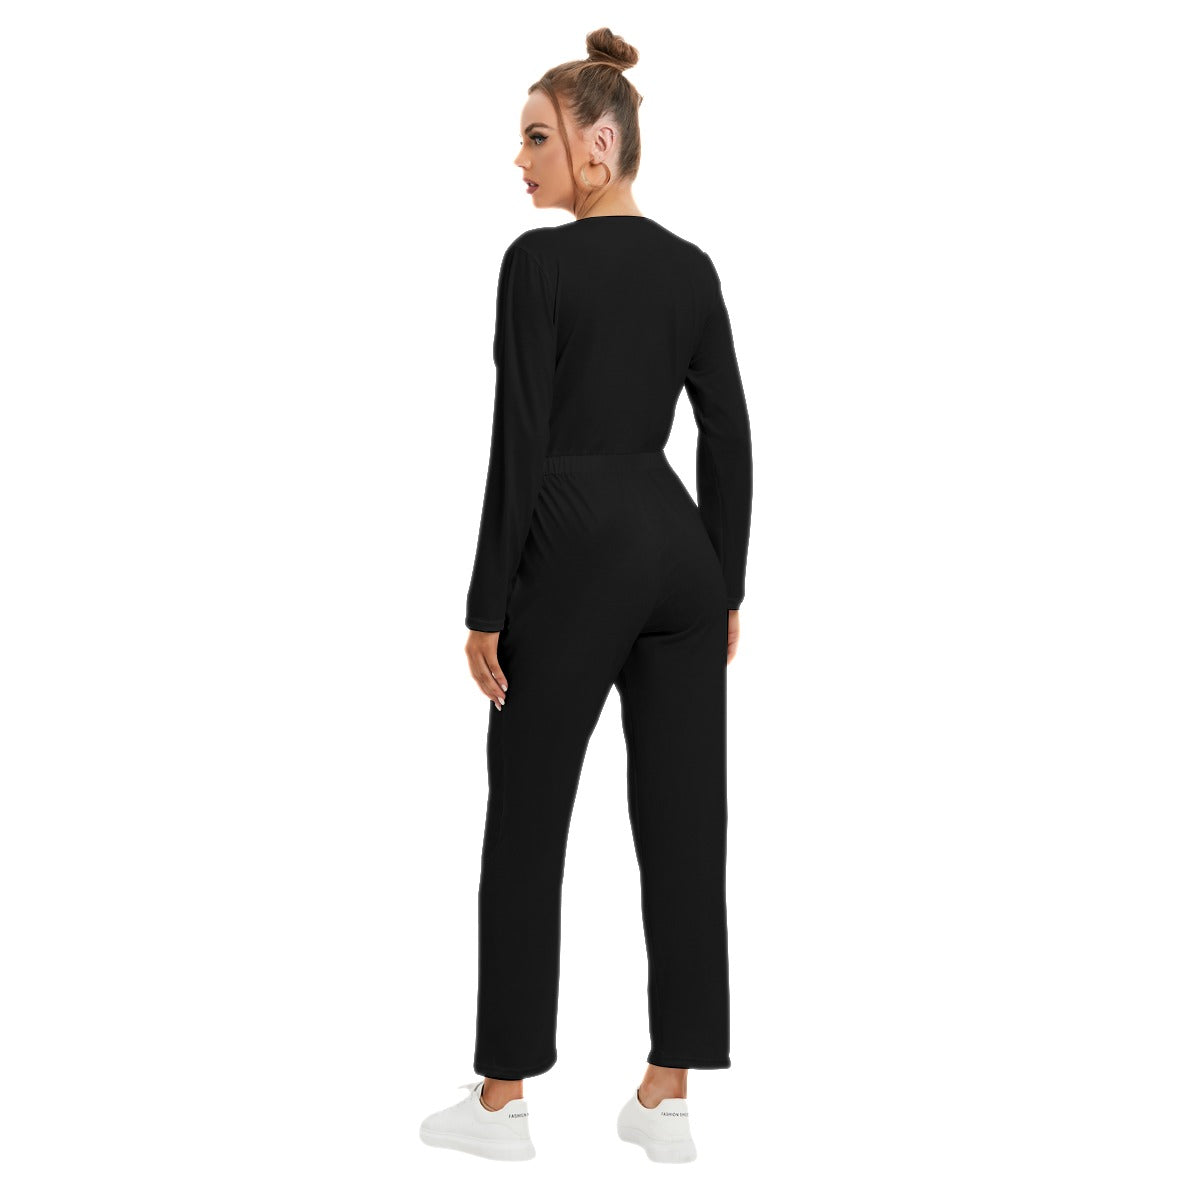 V-neck High Waist Yoga Jumpsuit - Personal Hour for Yoga and Meditations 